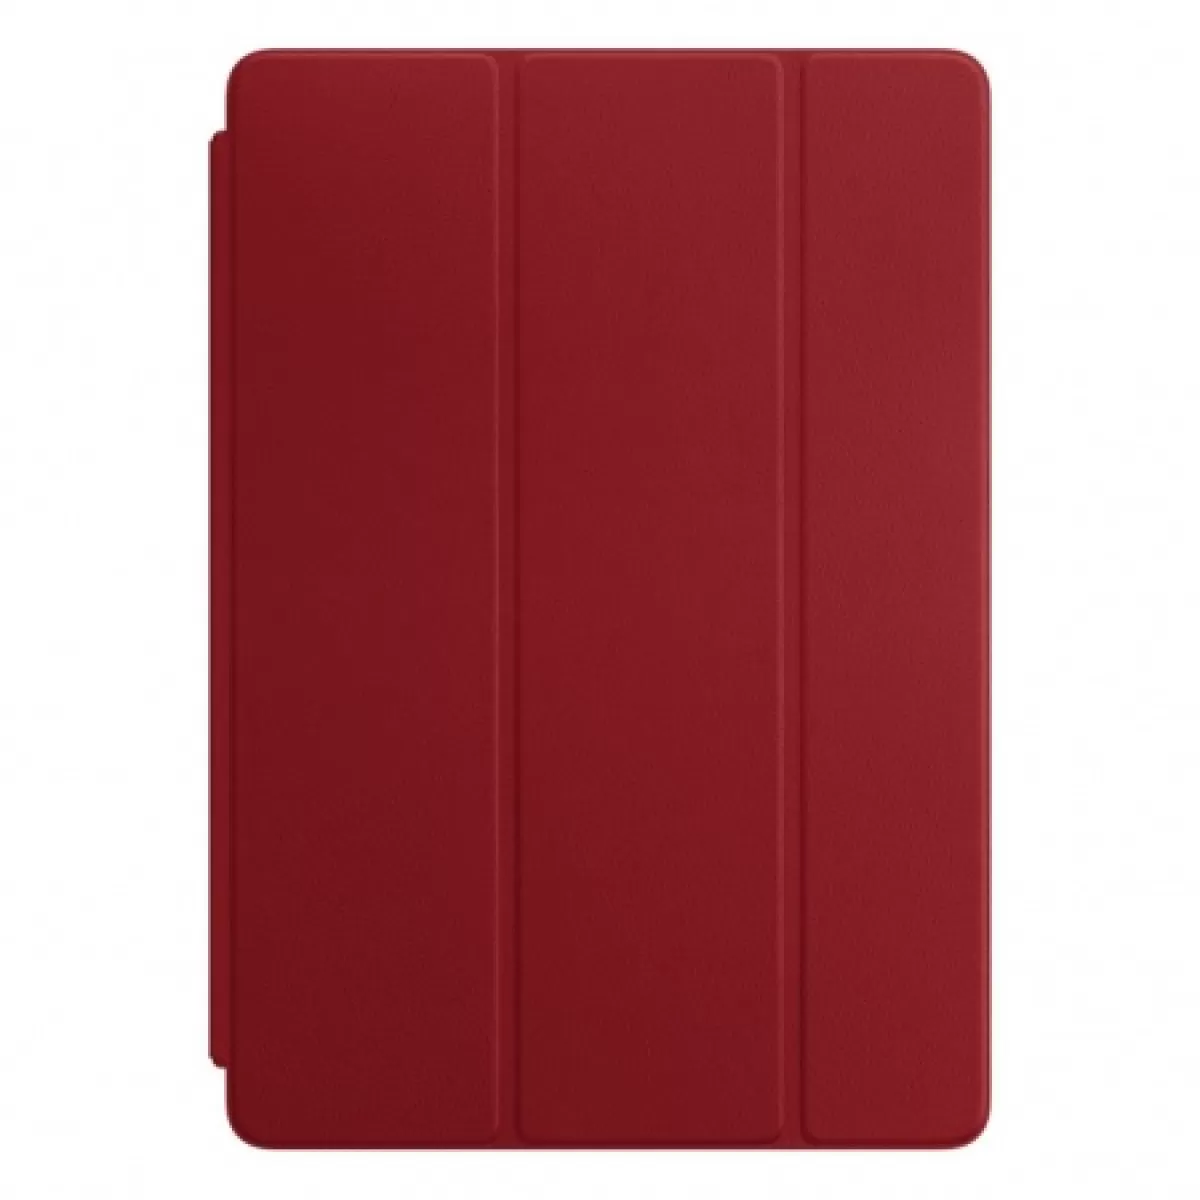 Apple Leather Smart Cover for 10.5inch iPad Pro (PRODUCT) RED